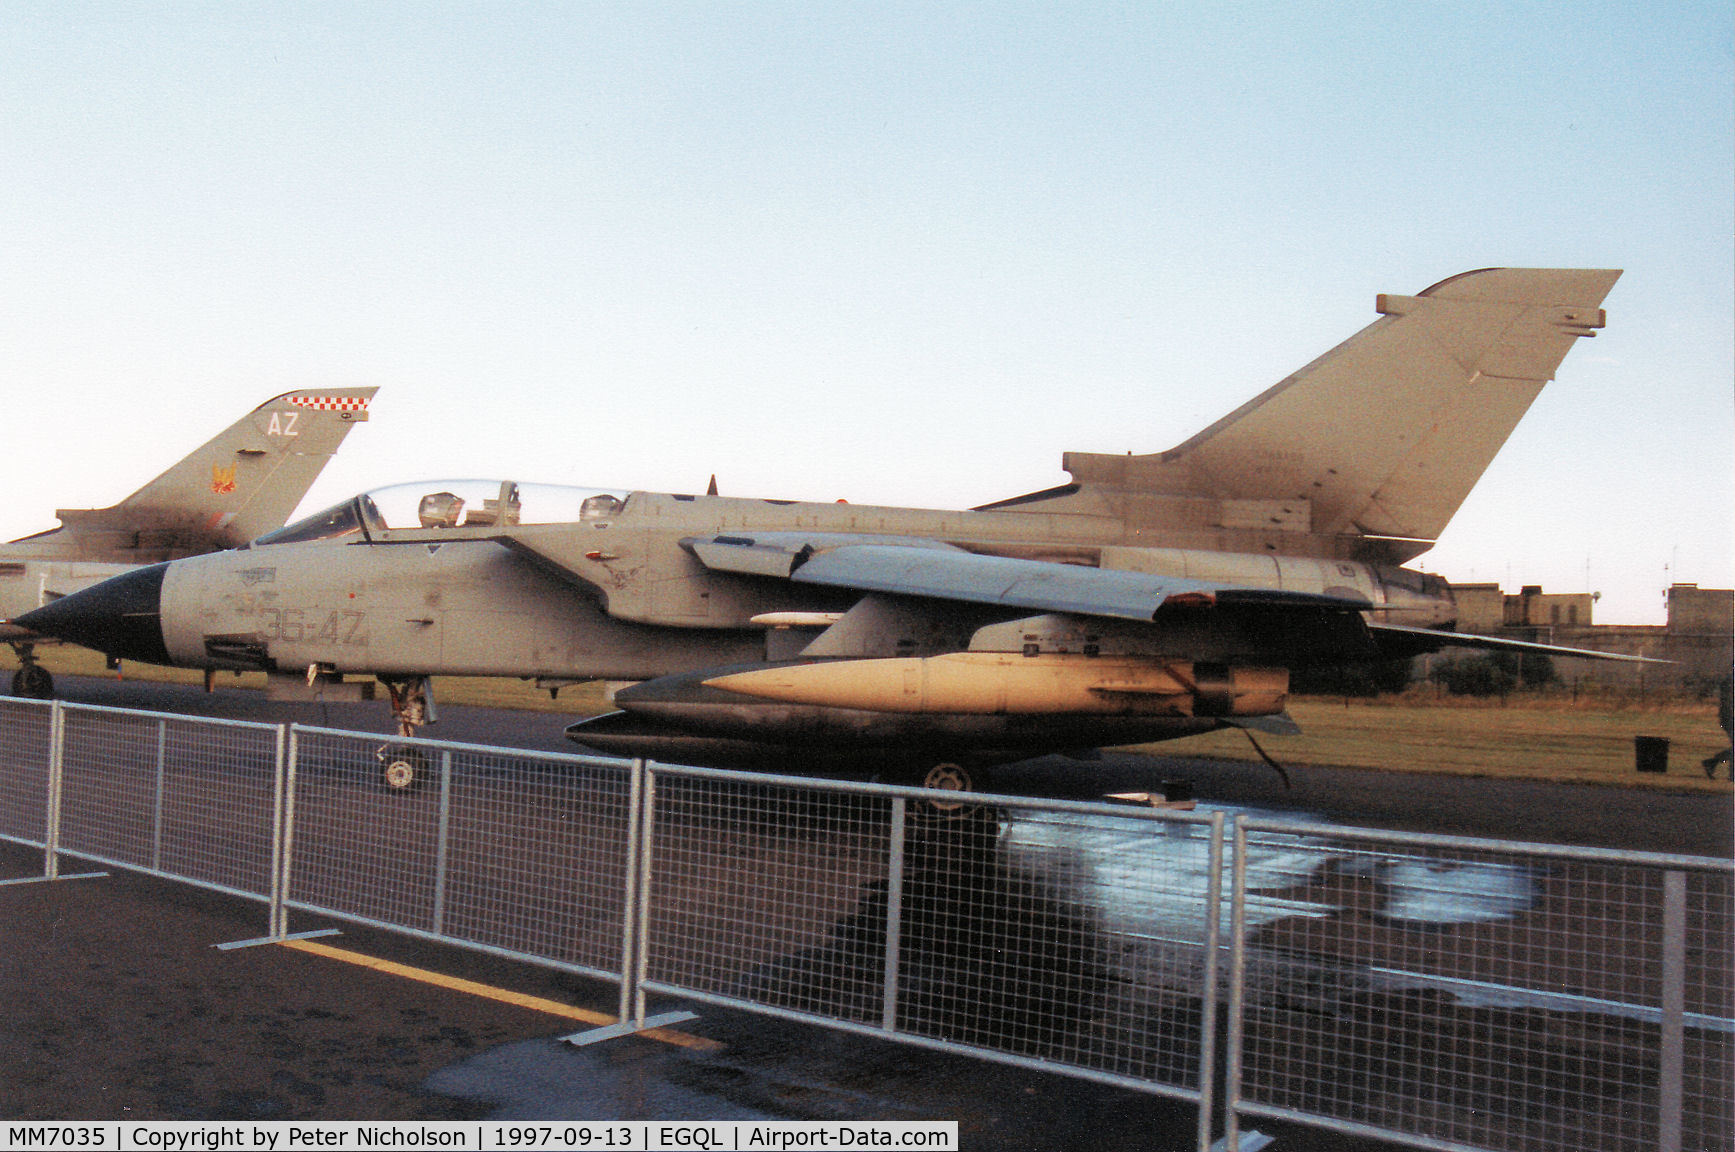 MM7035, Panavia Tornado IDS C/N 322/IS034/5044, Tornado IDS, callsign India 7050, of 36 Stormo on display at the 1997 RAF Leuchars Airshow.